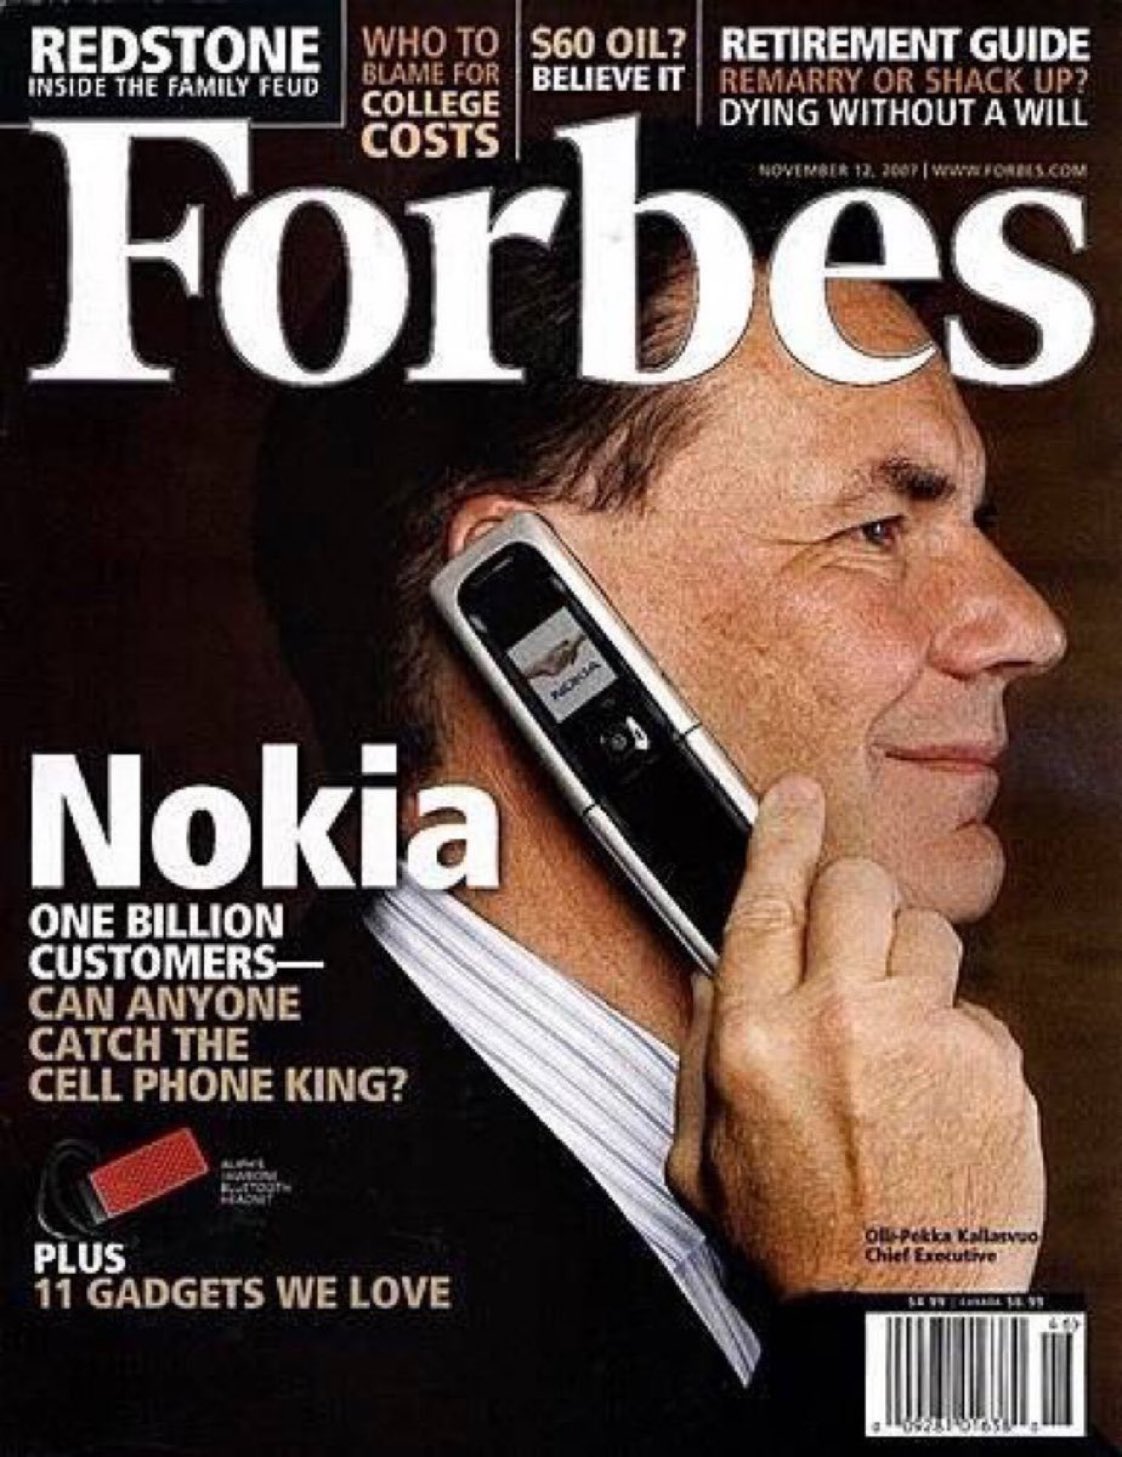 David Maina Kamiru on X: In 2007 Nokia had 1 BILLION customers. 'One day  you're the cock of the walk, the next a feather duster'   / X